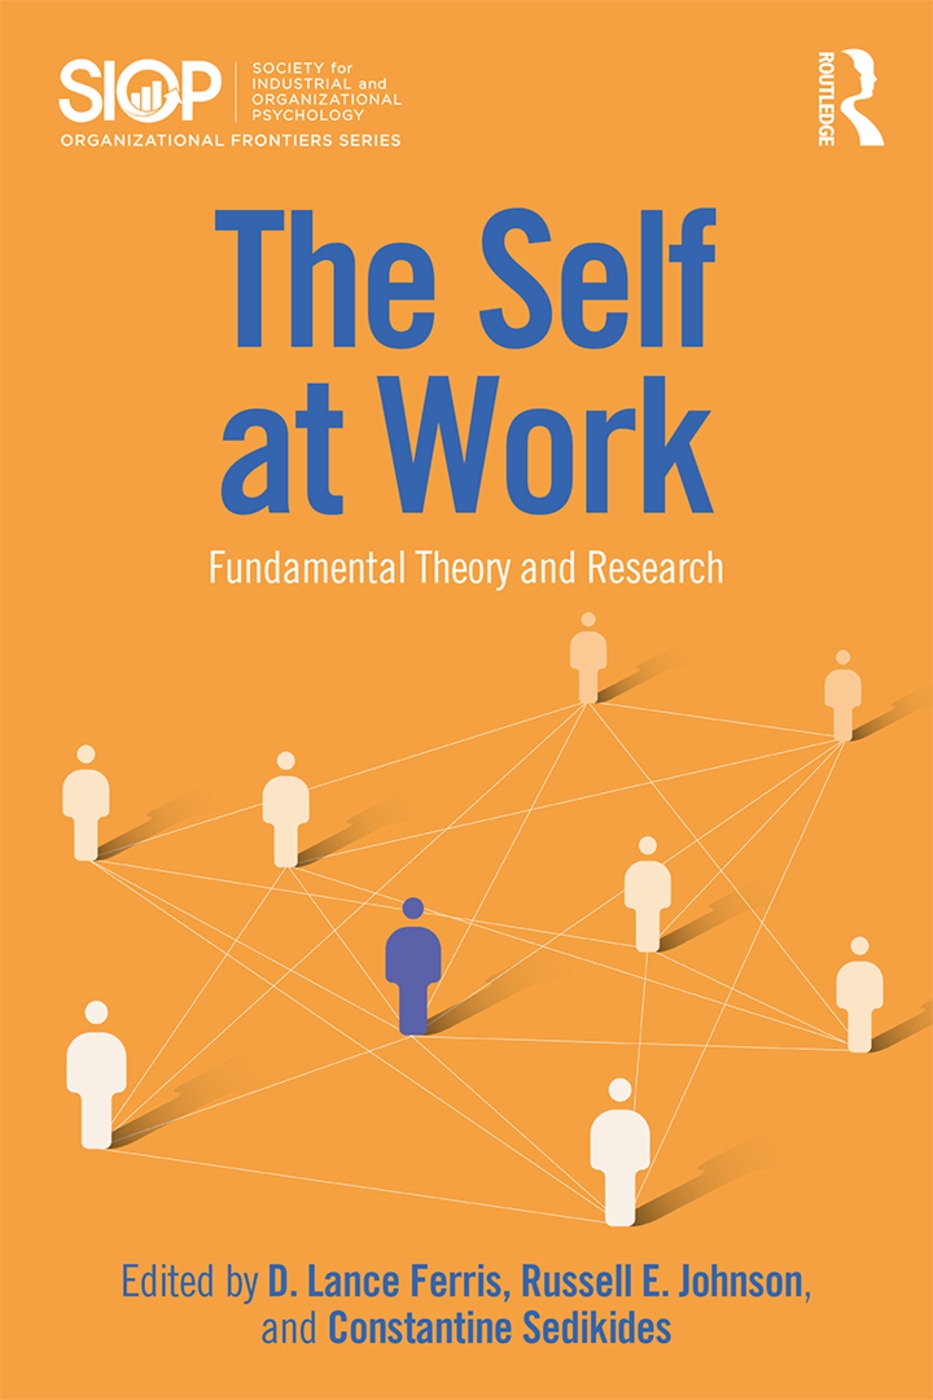 The Self at Work: Fundamental Theory and Research